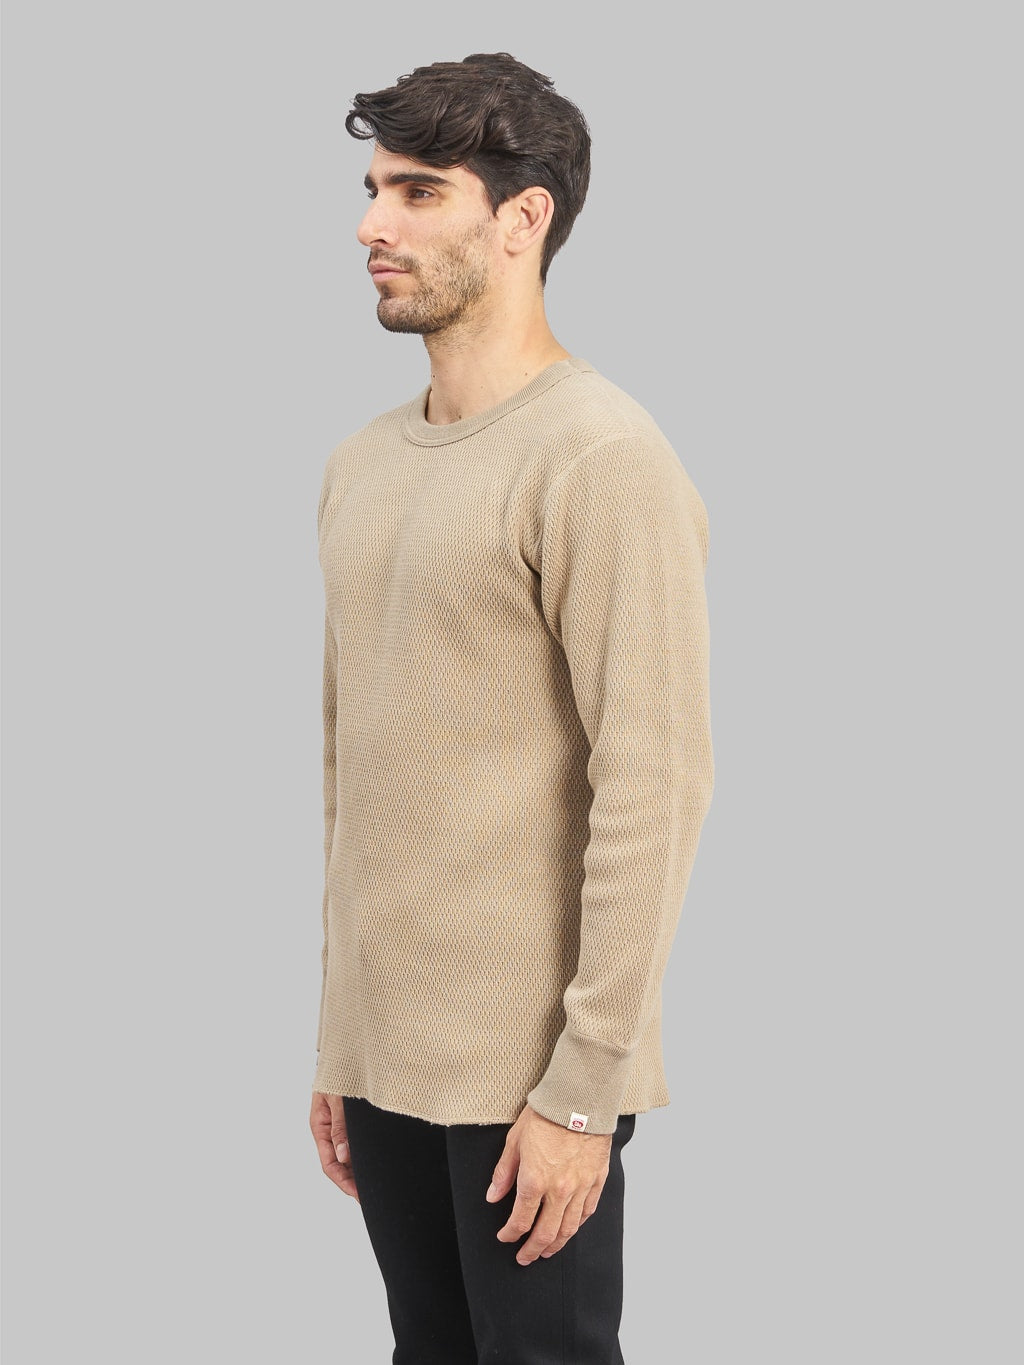 UES Double Honeycomb Thermal TShirt beige model side fit